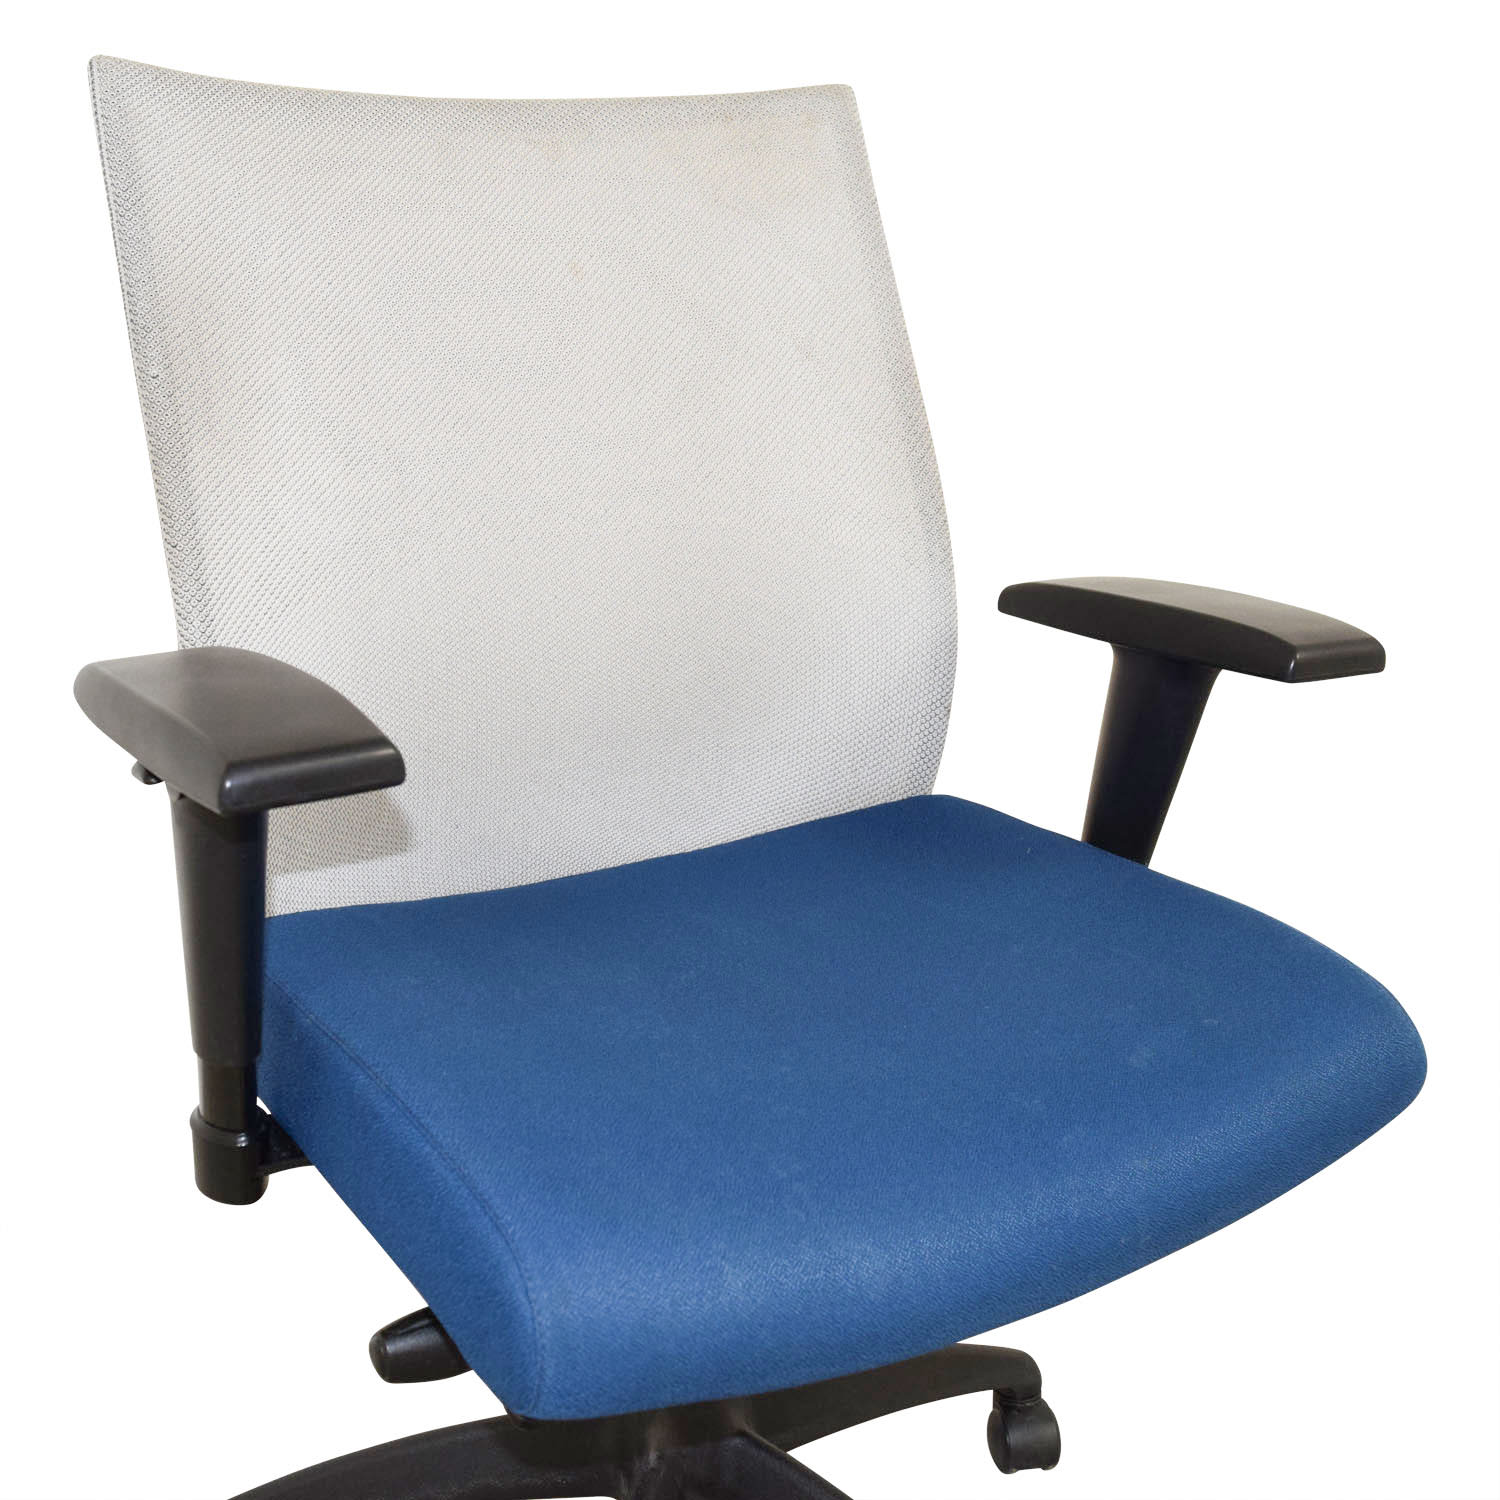 https://res.cloudinary.com/dkqtxtobb/image/upload/f_auto,q_auto:best,w_1500/product-assets/29663/stylex/chairs/home-office-chairs/second-hand-stylex-blue-adjustable-arms-task-chair.jpeg